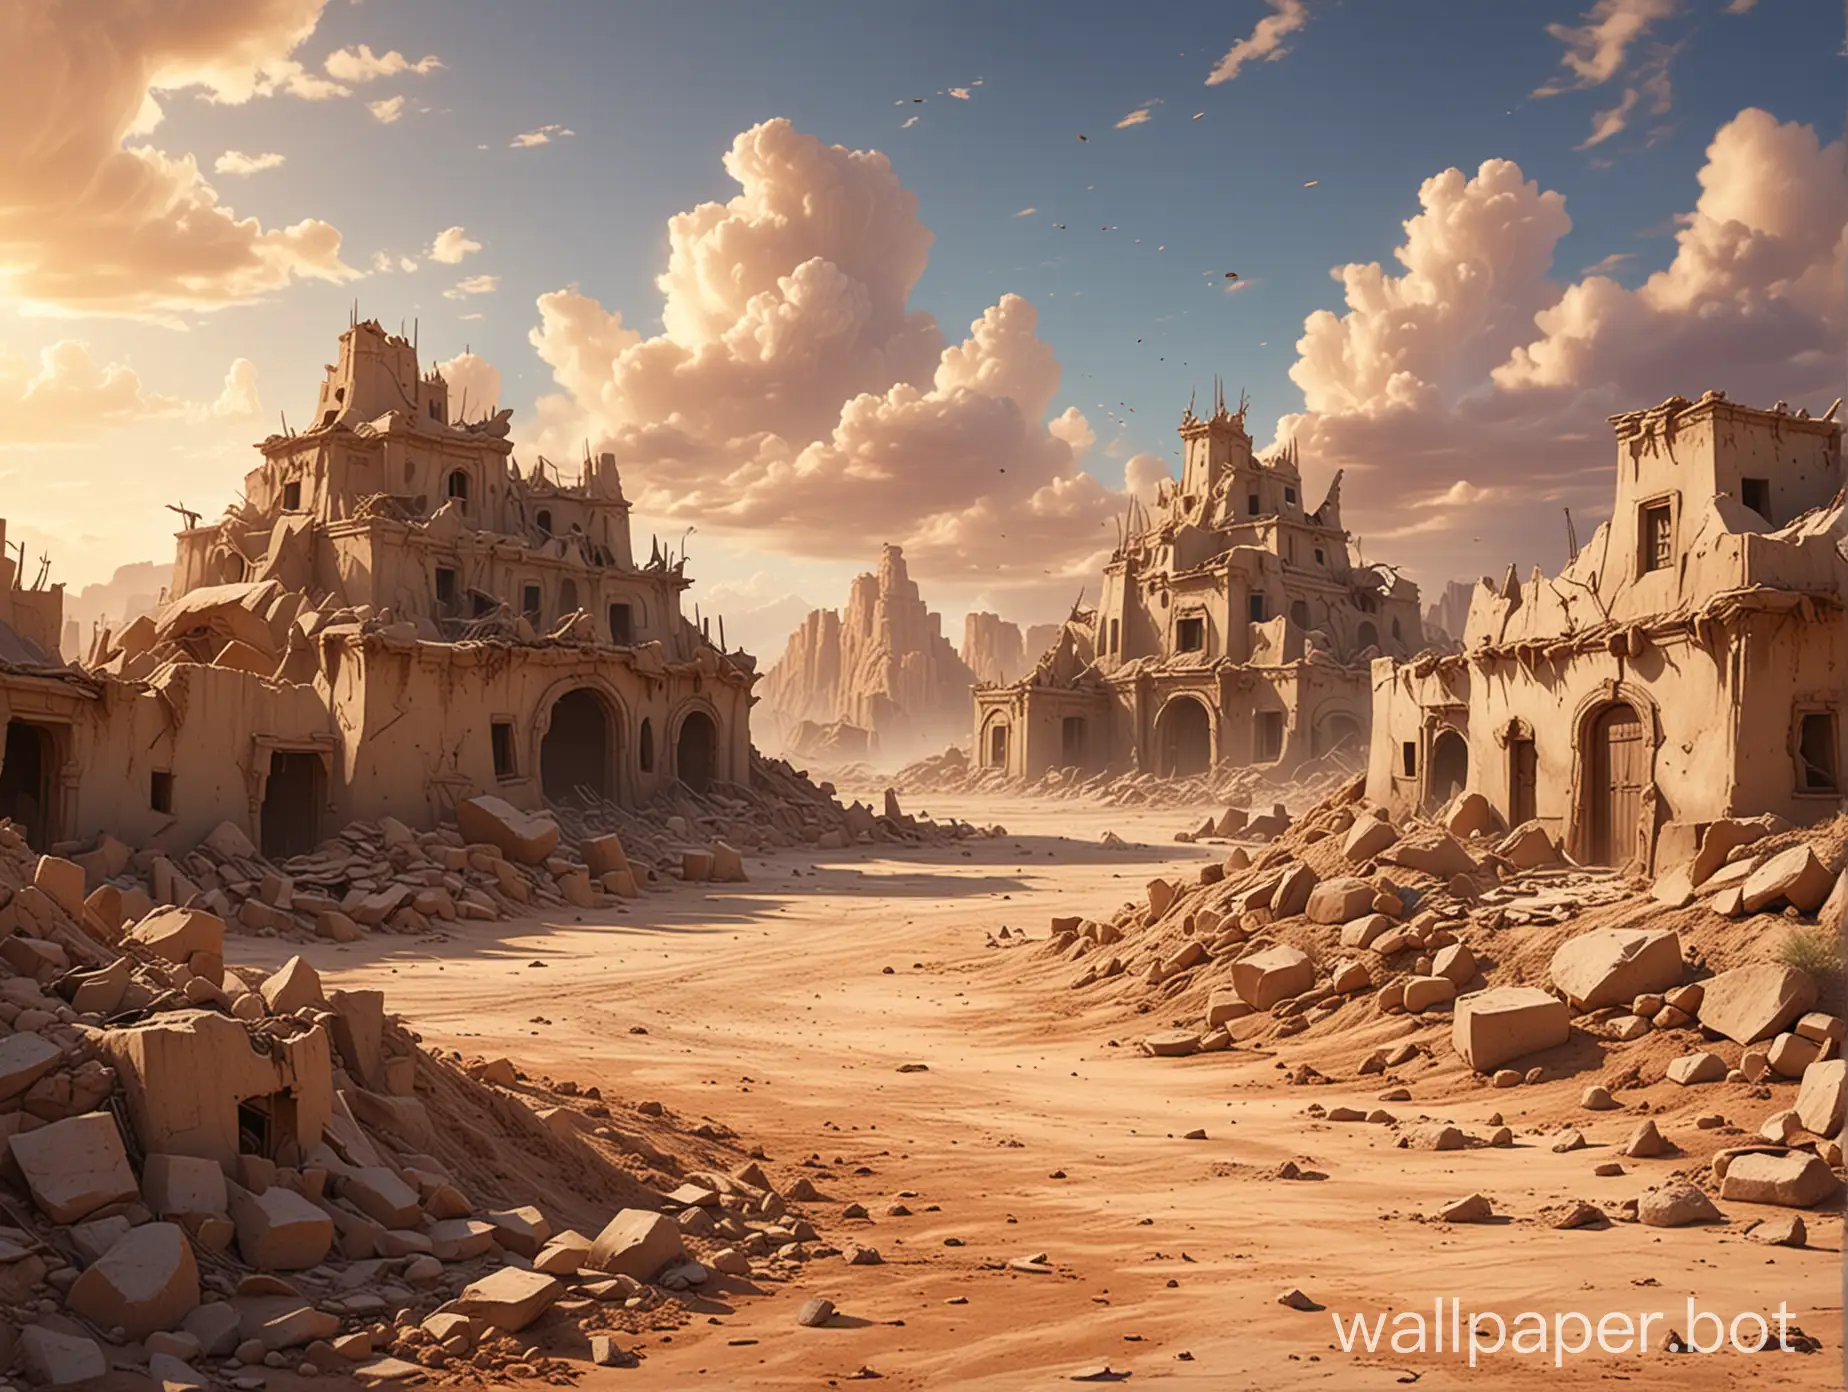 Fantasy desert landscape with a large pile of demolished sand buildings, fully destroyed in the back and a plain ground in front, beautiful sky, realistic and highly detailed, in Disney and Pixar style.